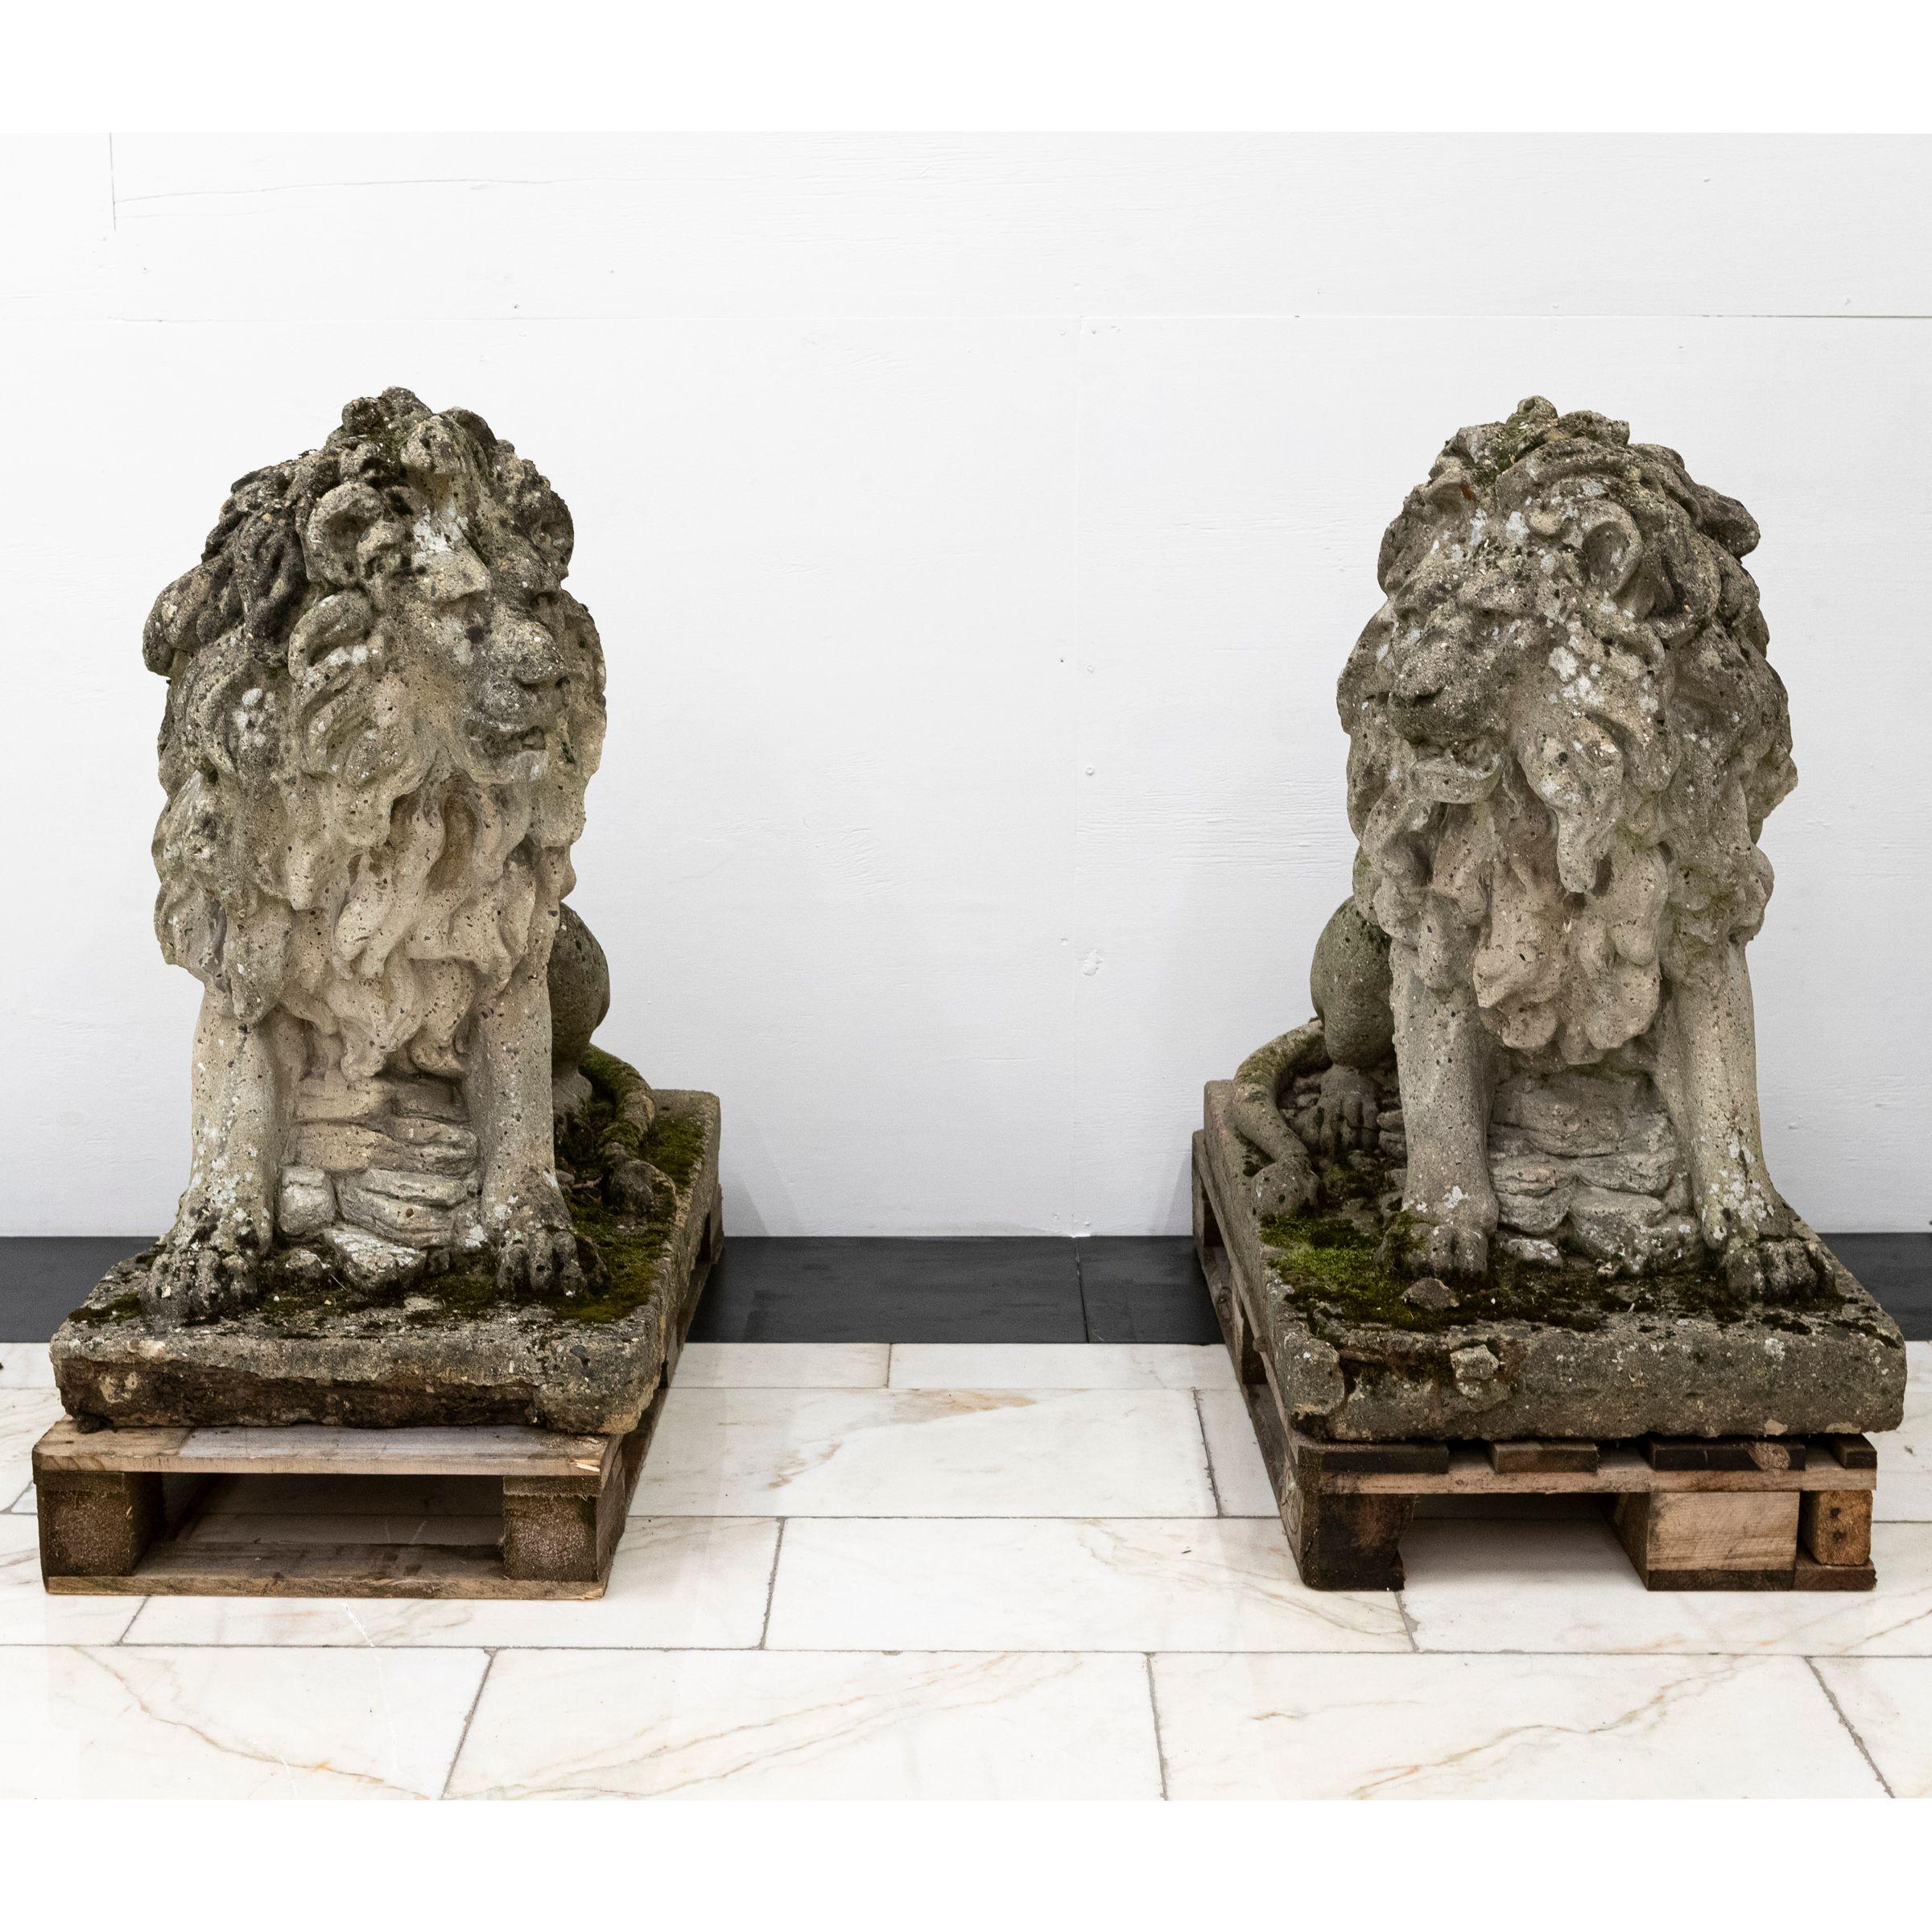 An impressive and imposing pair of reclaimed stone lions. 

Very detailed, the mid-20th century pair have exceptional patina and would make for a showpiece for a property entrance or garden feature.

Symbolising strength, power, and justice, the